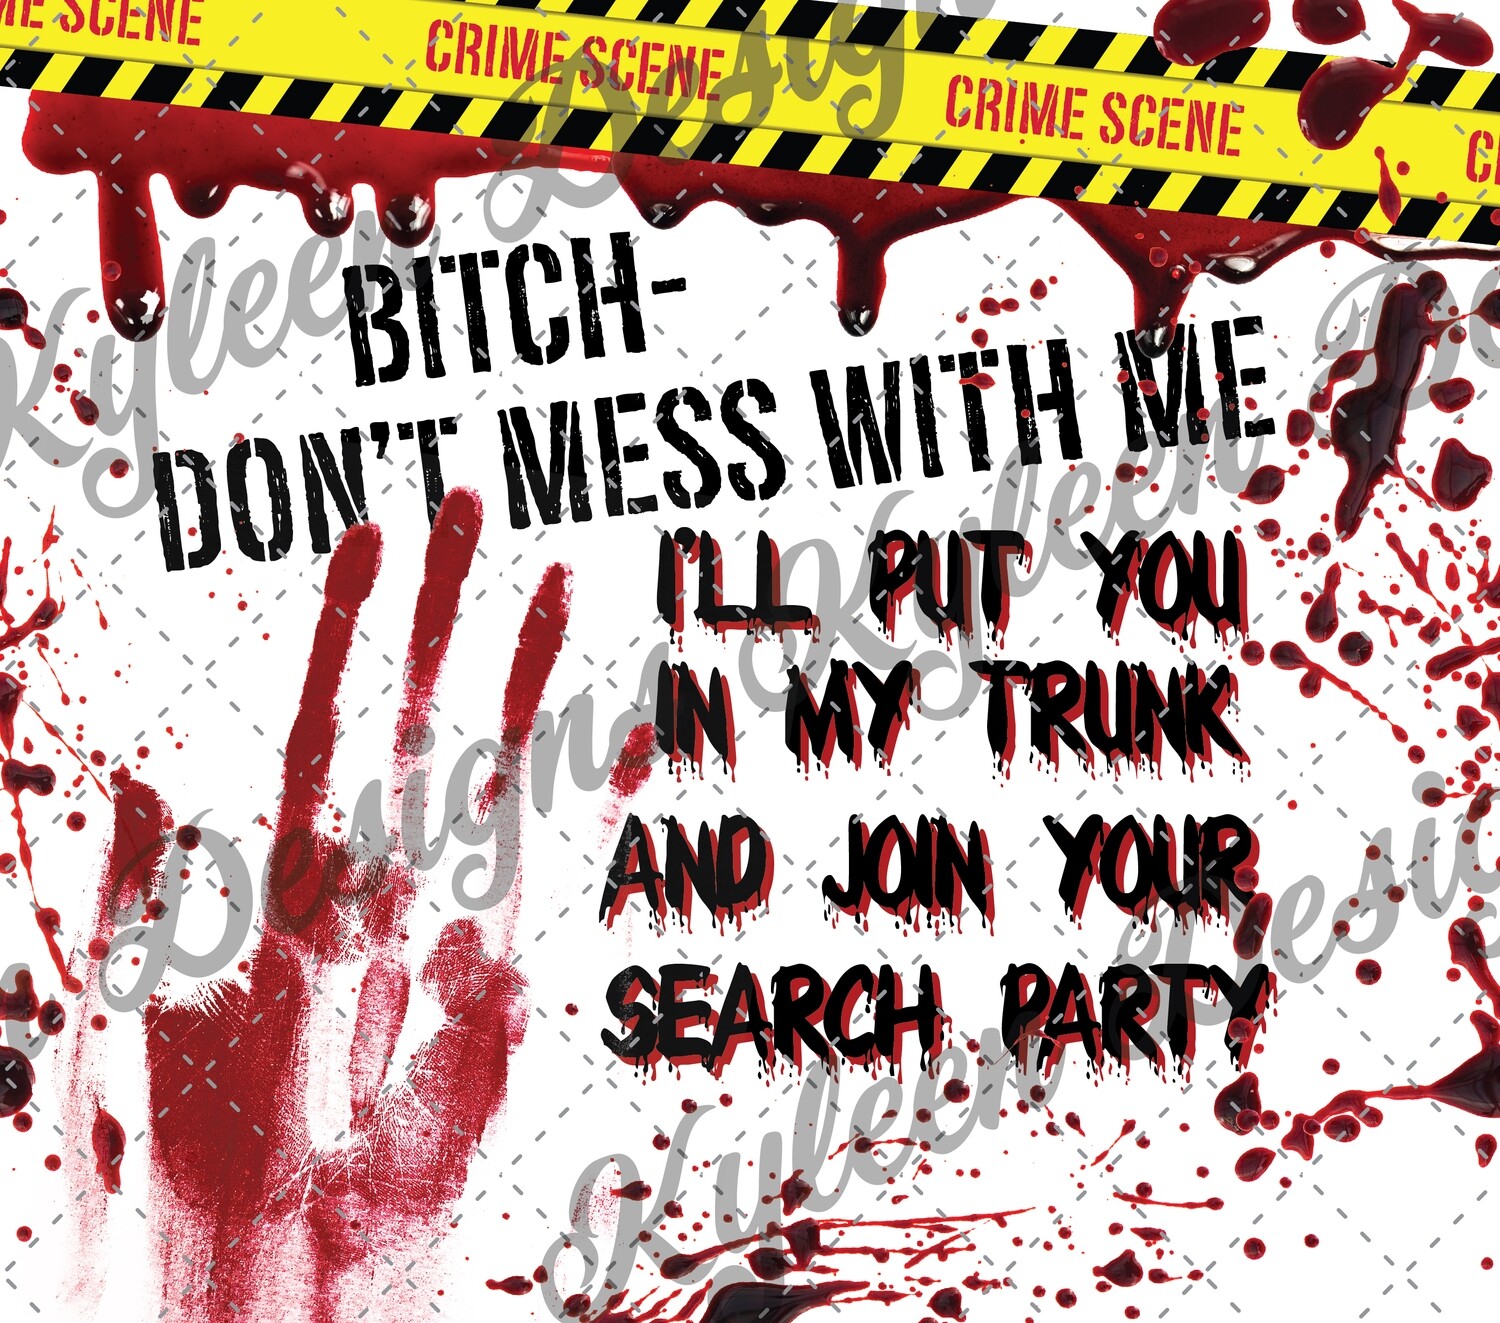 20 ounce straight Don't mess with me wrap for sublimation, waterslide High res PNG digital file